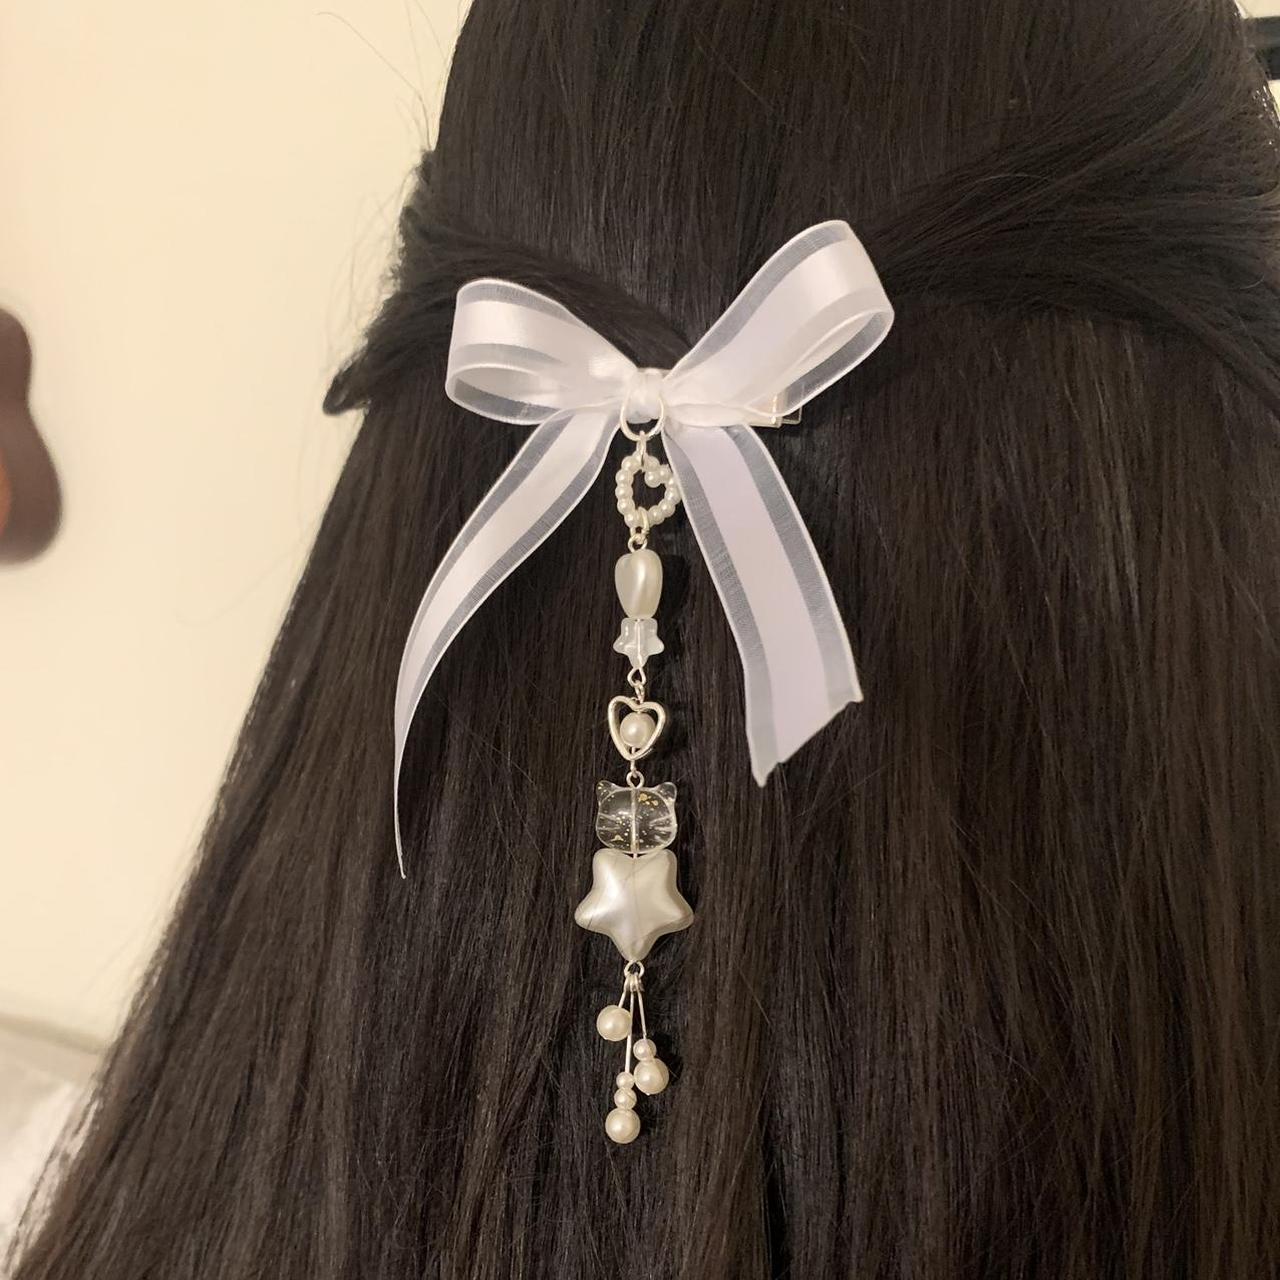 Women's White and Silver Hair-accessories (4)